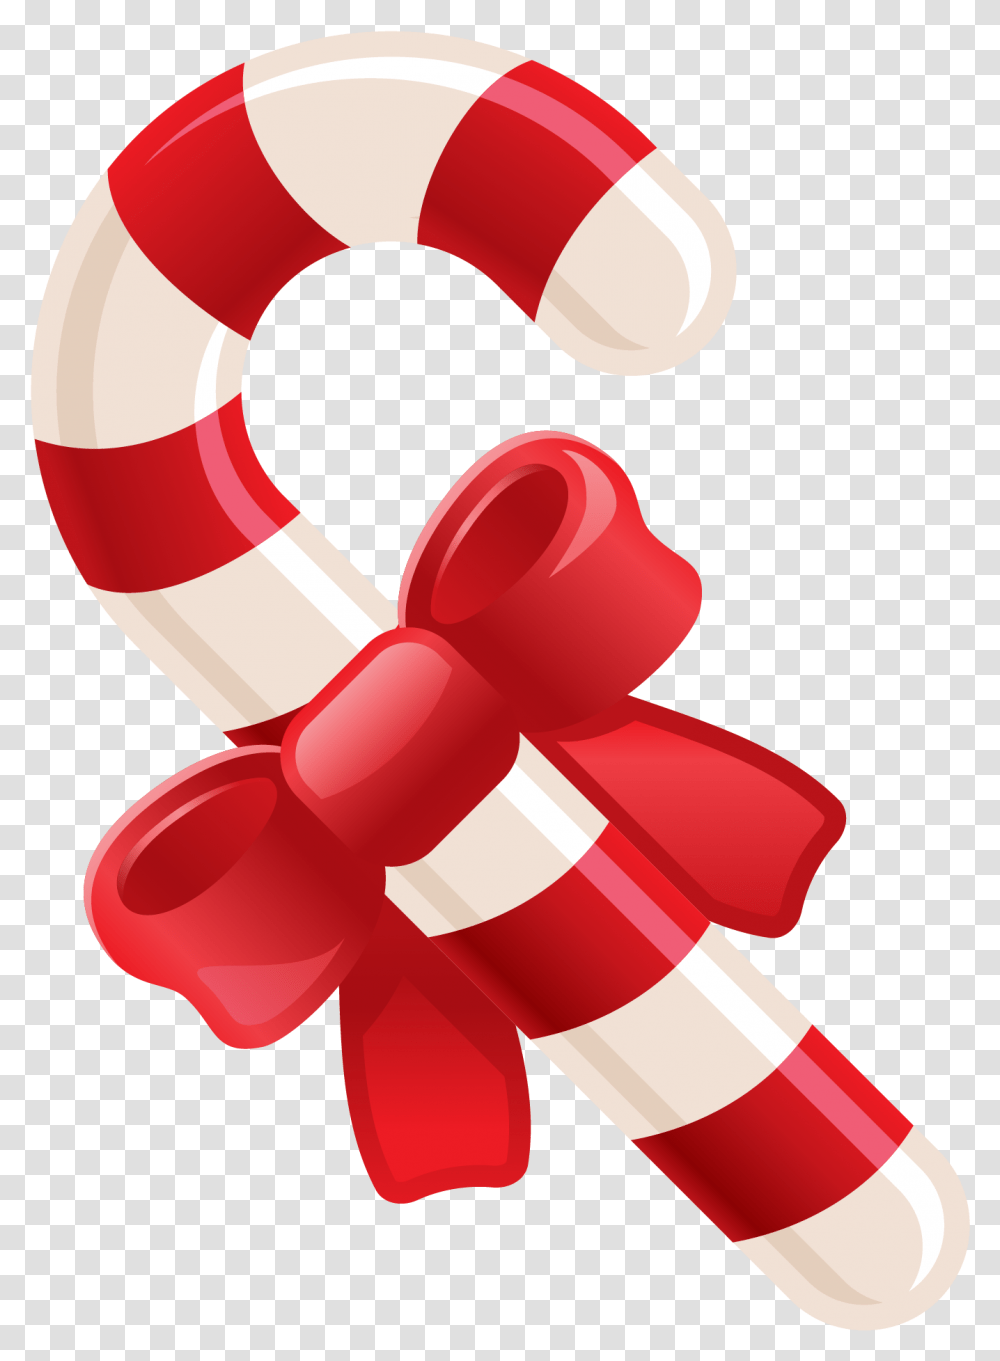 Hq Christmas Candy Free Images Christmas Candy Cane, Life Buoy, Alphabet, Text Transparent Png